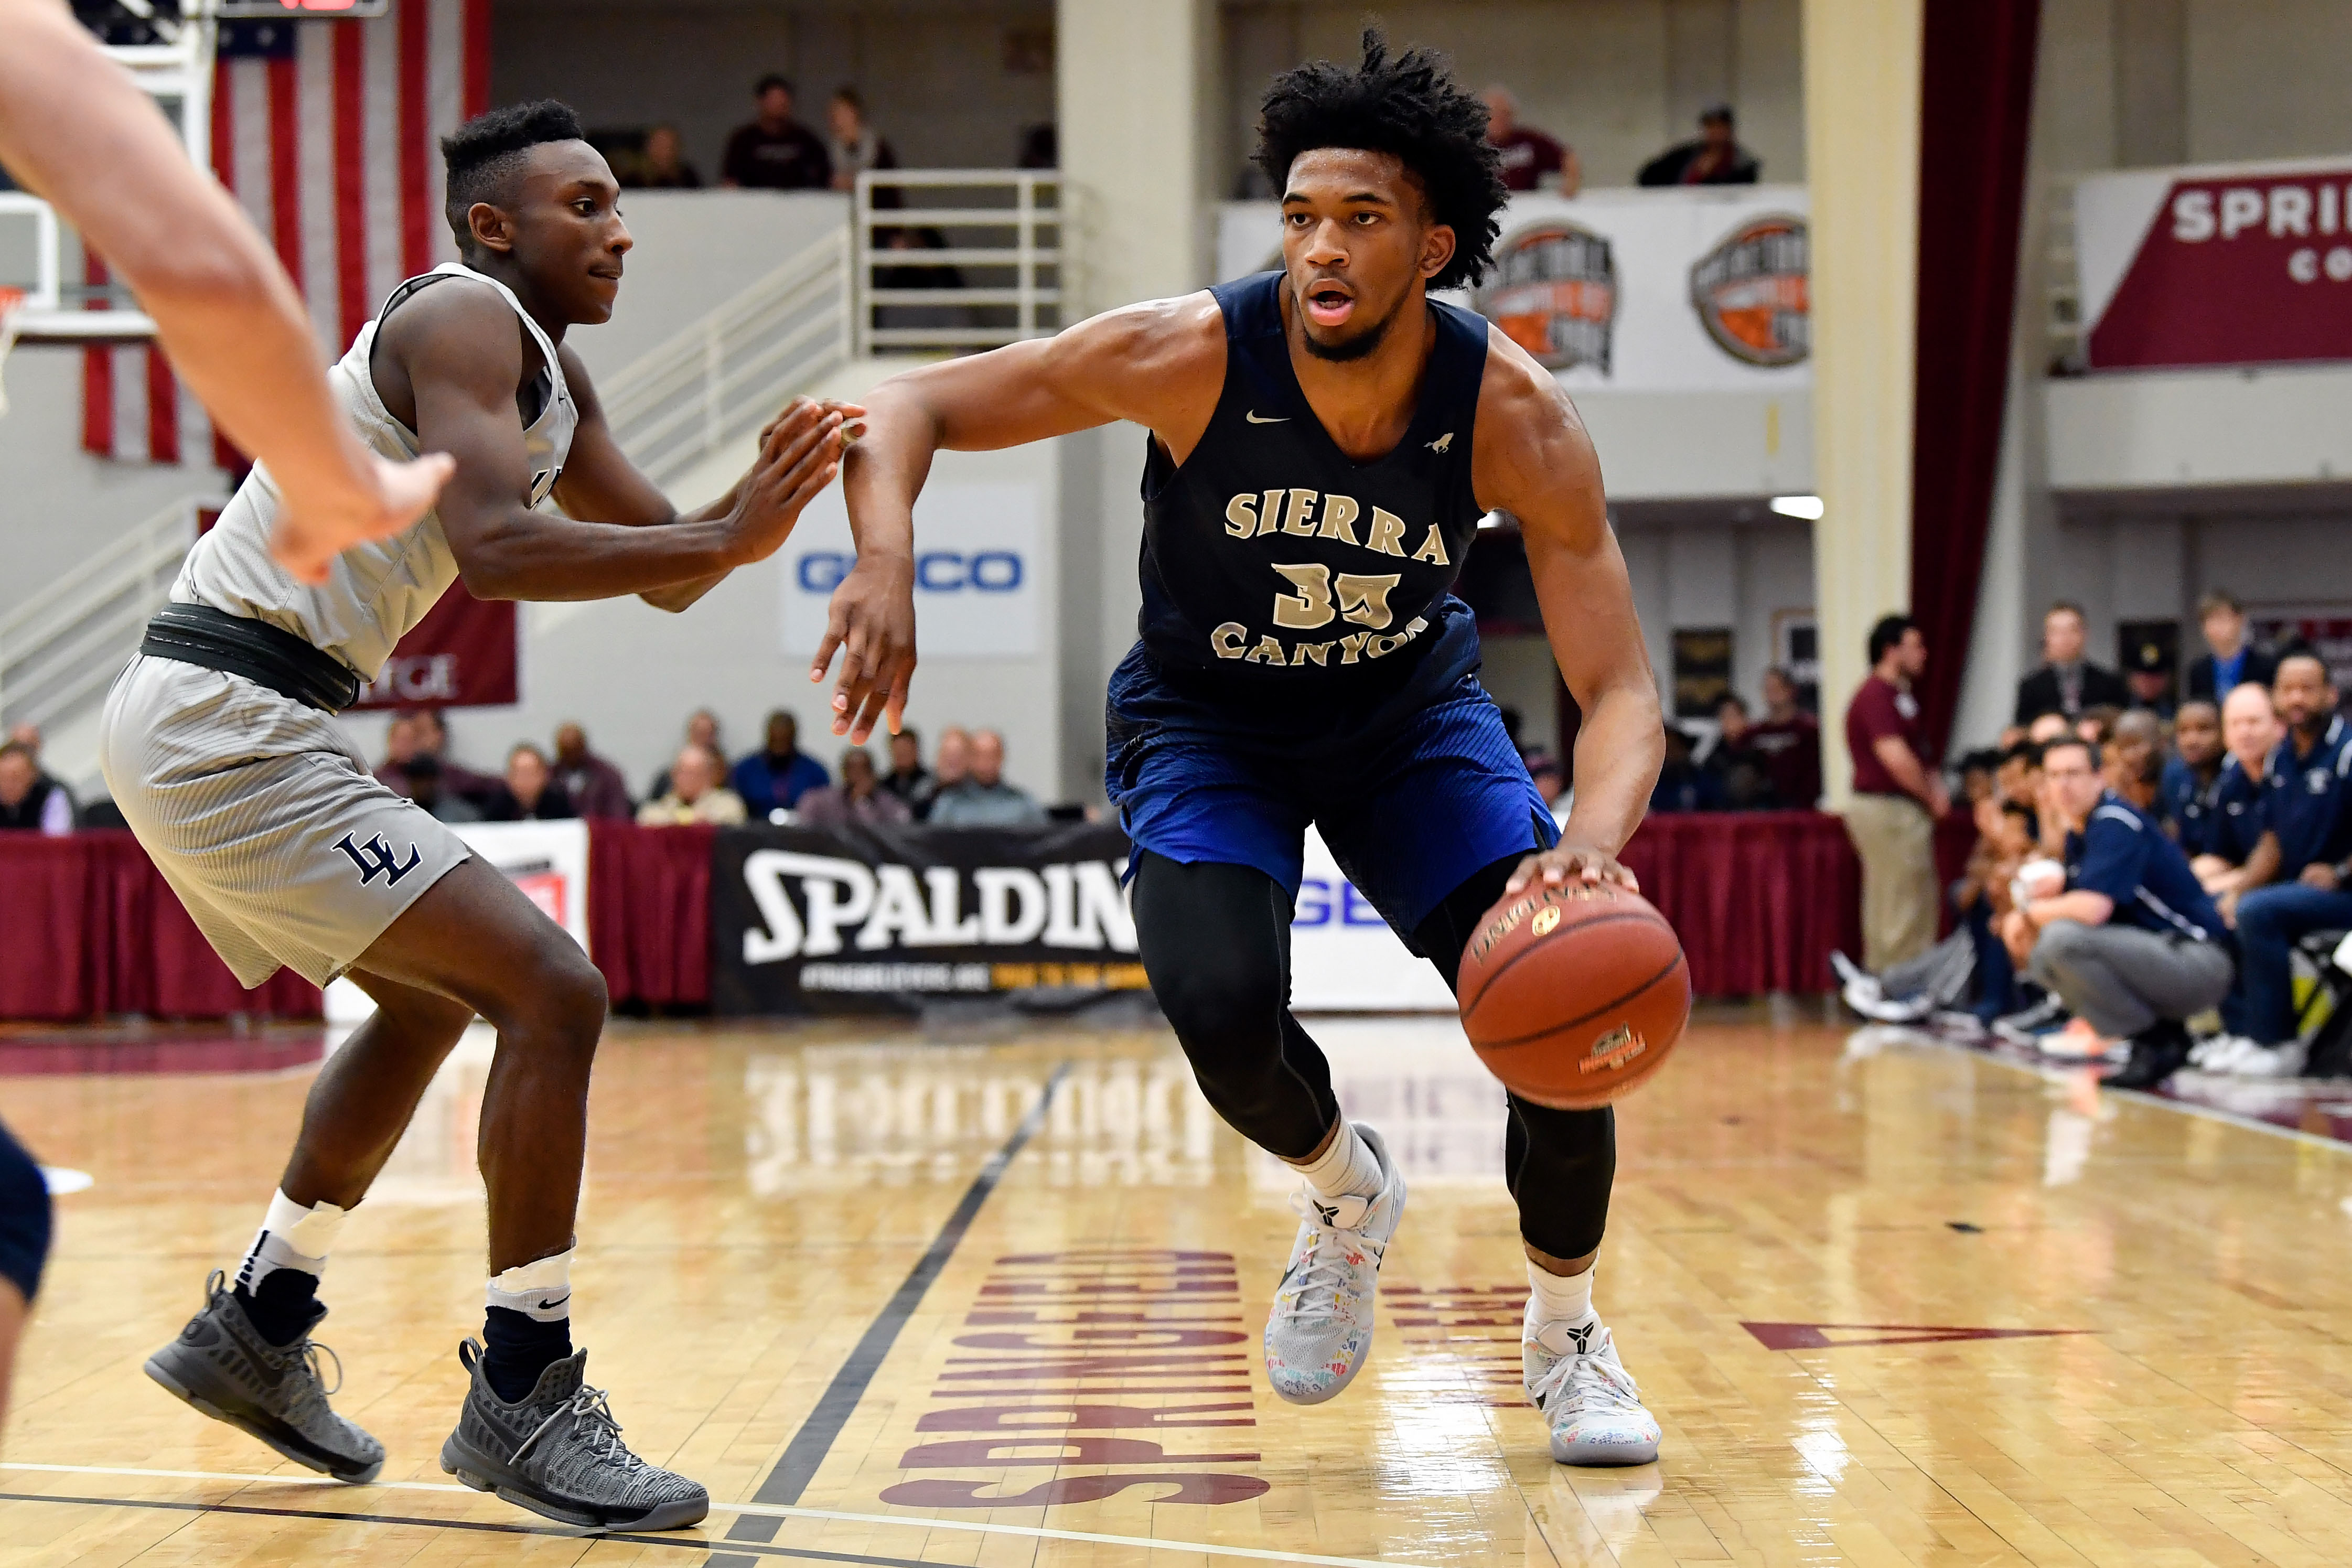 Jan 16, 2017; Springfield , MA, USA; Sierra Canyon School Trailblazers player Marvin Bagley III (35) drives to the basket past La Lumiere School Lakers player Isaiah Coleman Lands (11) at Blake Arena. Mandatory Credit: Brian Fluharty-USA TODAY Sports ORG XMIT: USATSI-355414 ORIG FILE ID:  20170116_ads_fb7_328.JPG